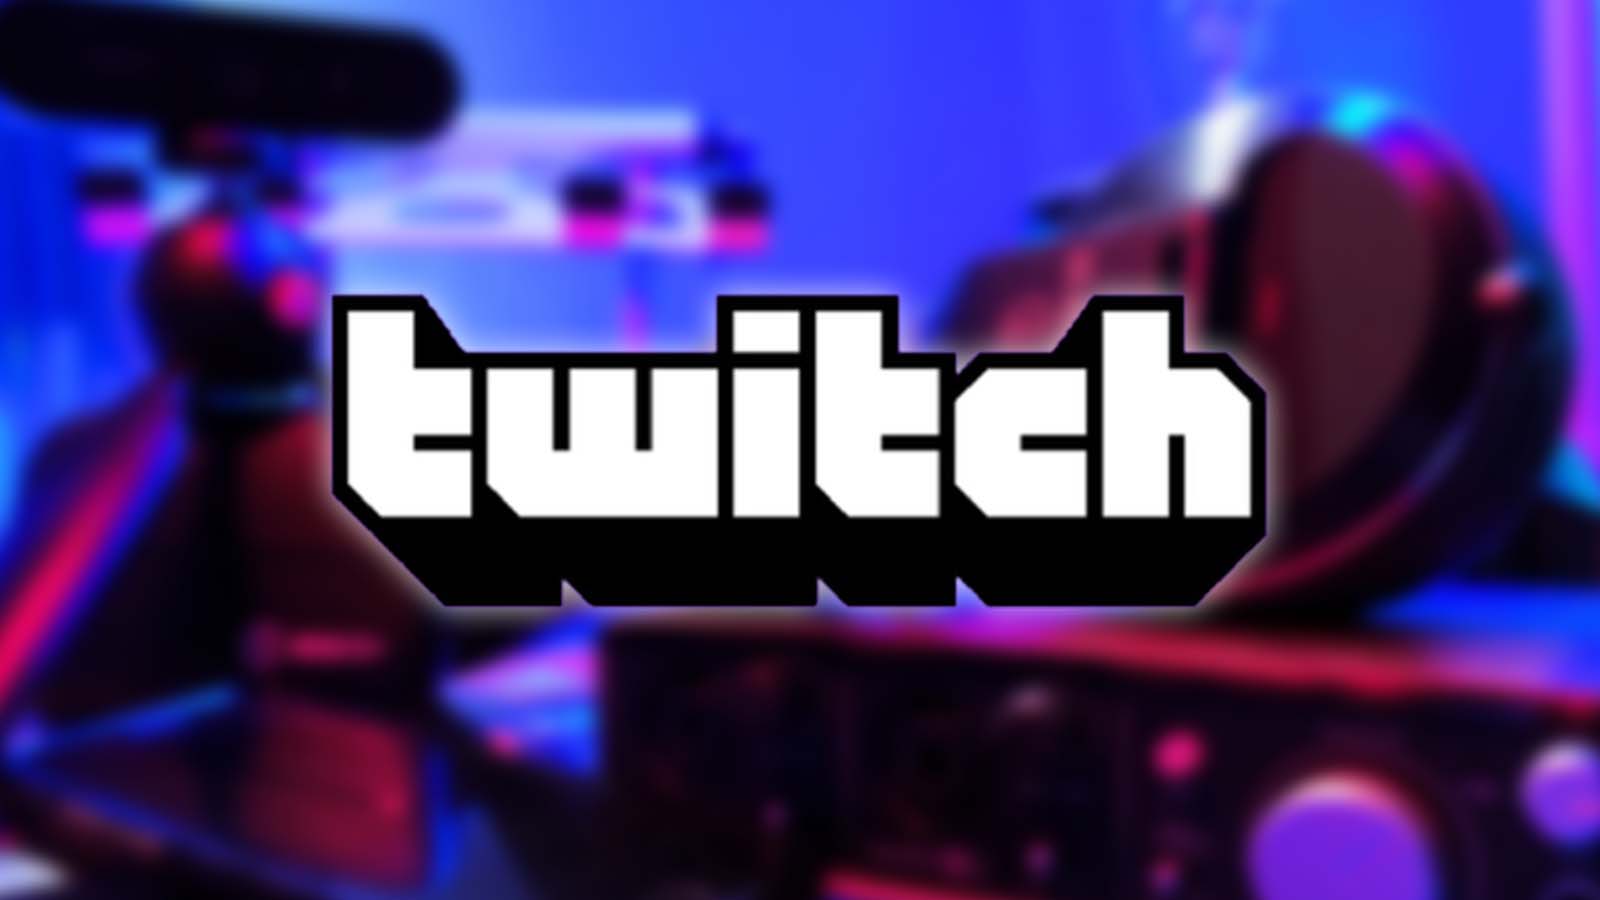 14 Tips for Just Chatting Streams on Twitch (2020 Update) - The Emergence